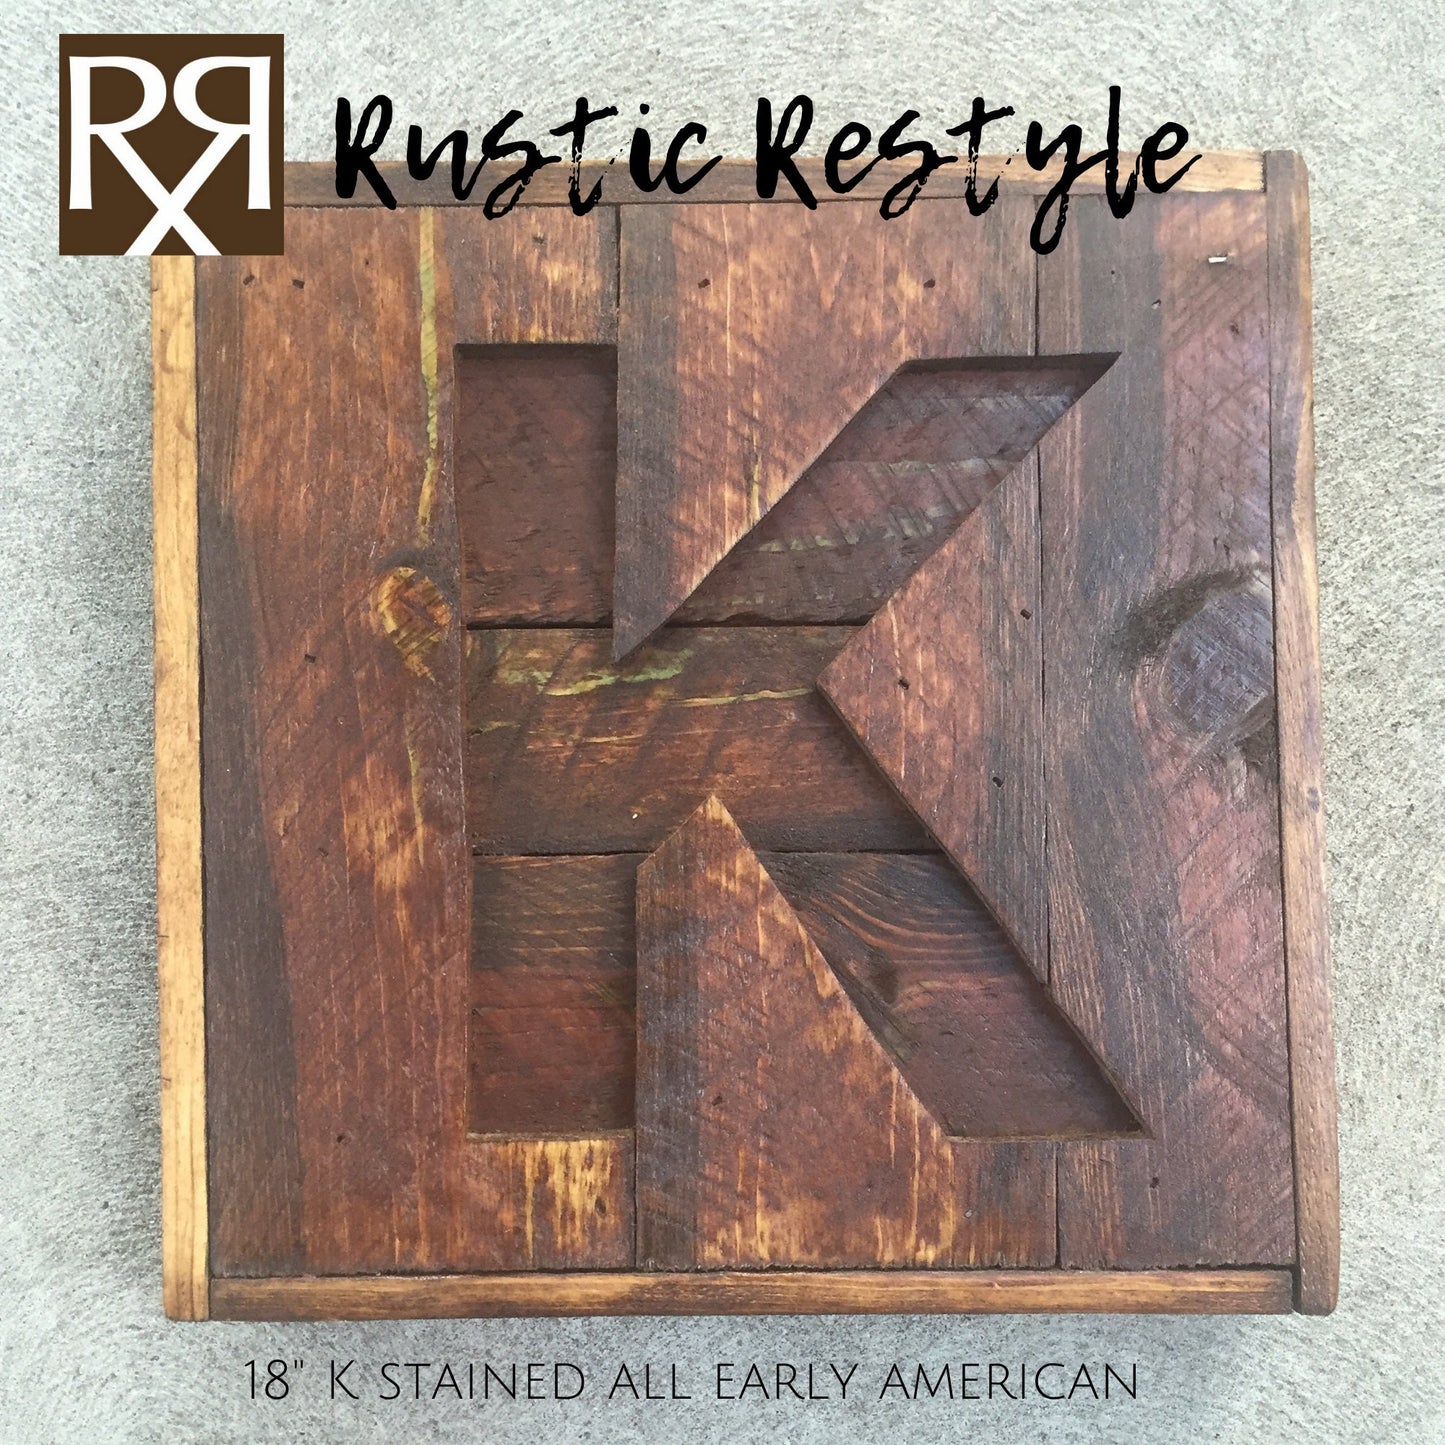 Recycled Wooden Letter Sign, Pallet Wall Decor, Rustic wood letter K sign, Christmas gift, Custom wood Sign, Personalized Family wood signs